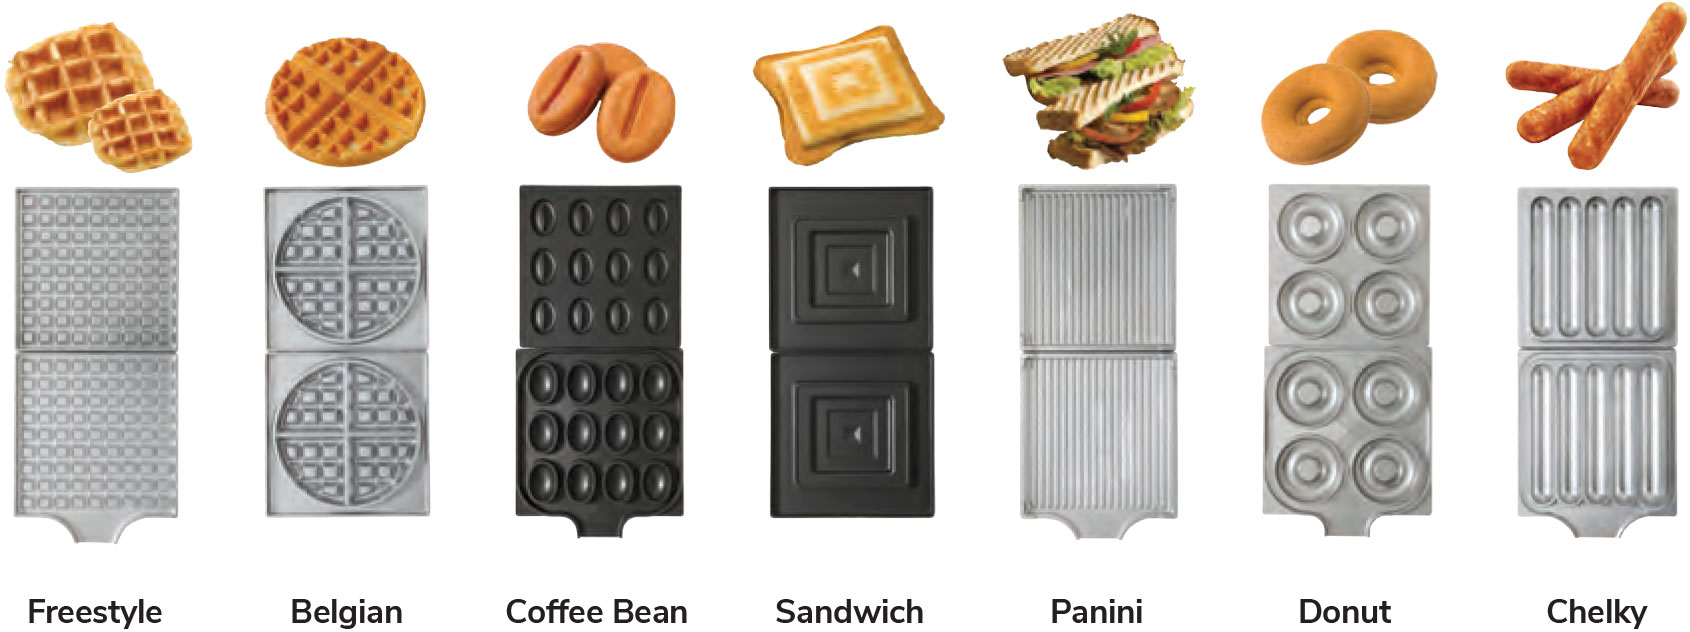 Snack System Plates